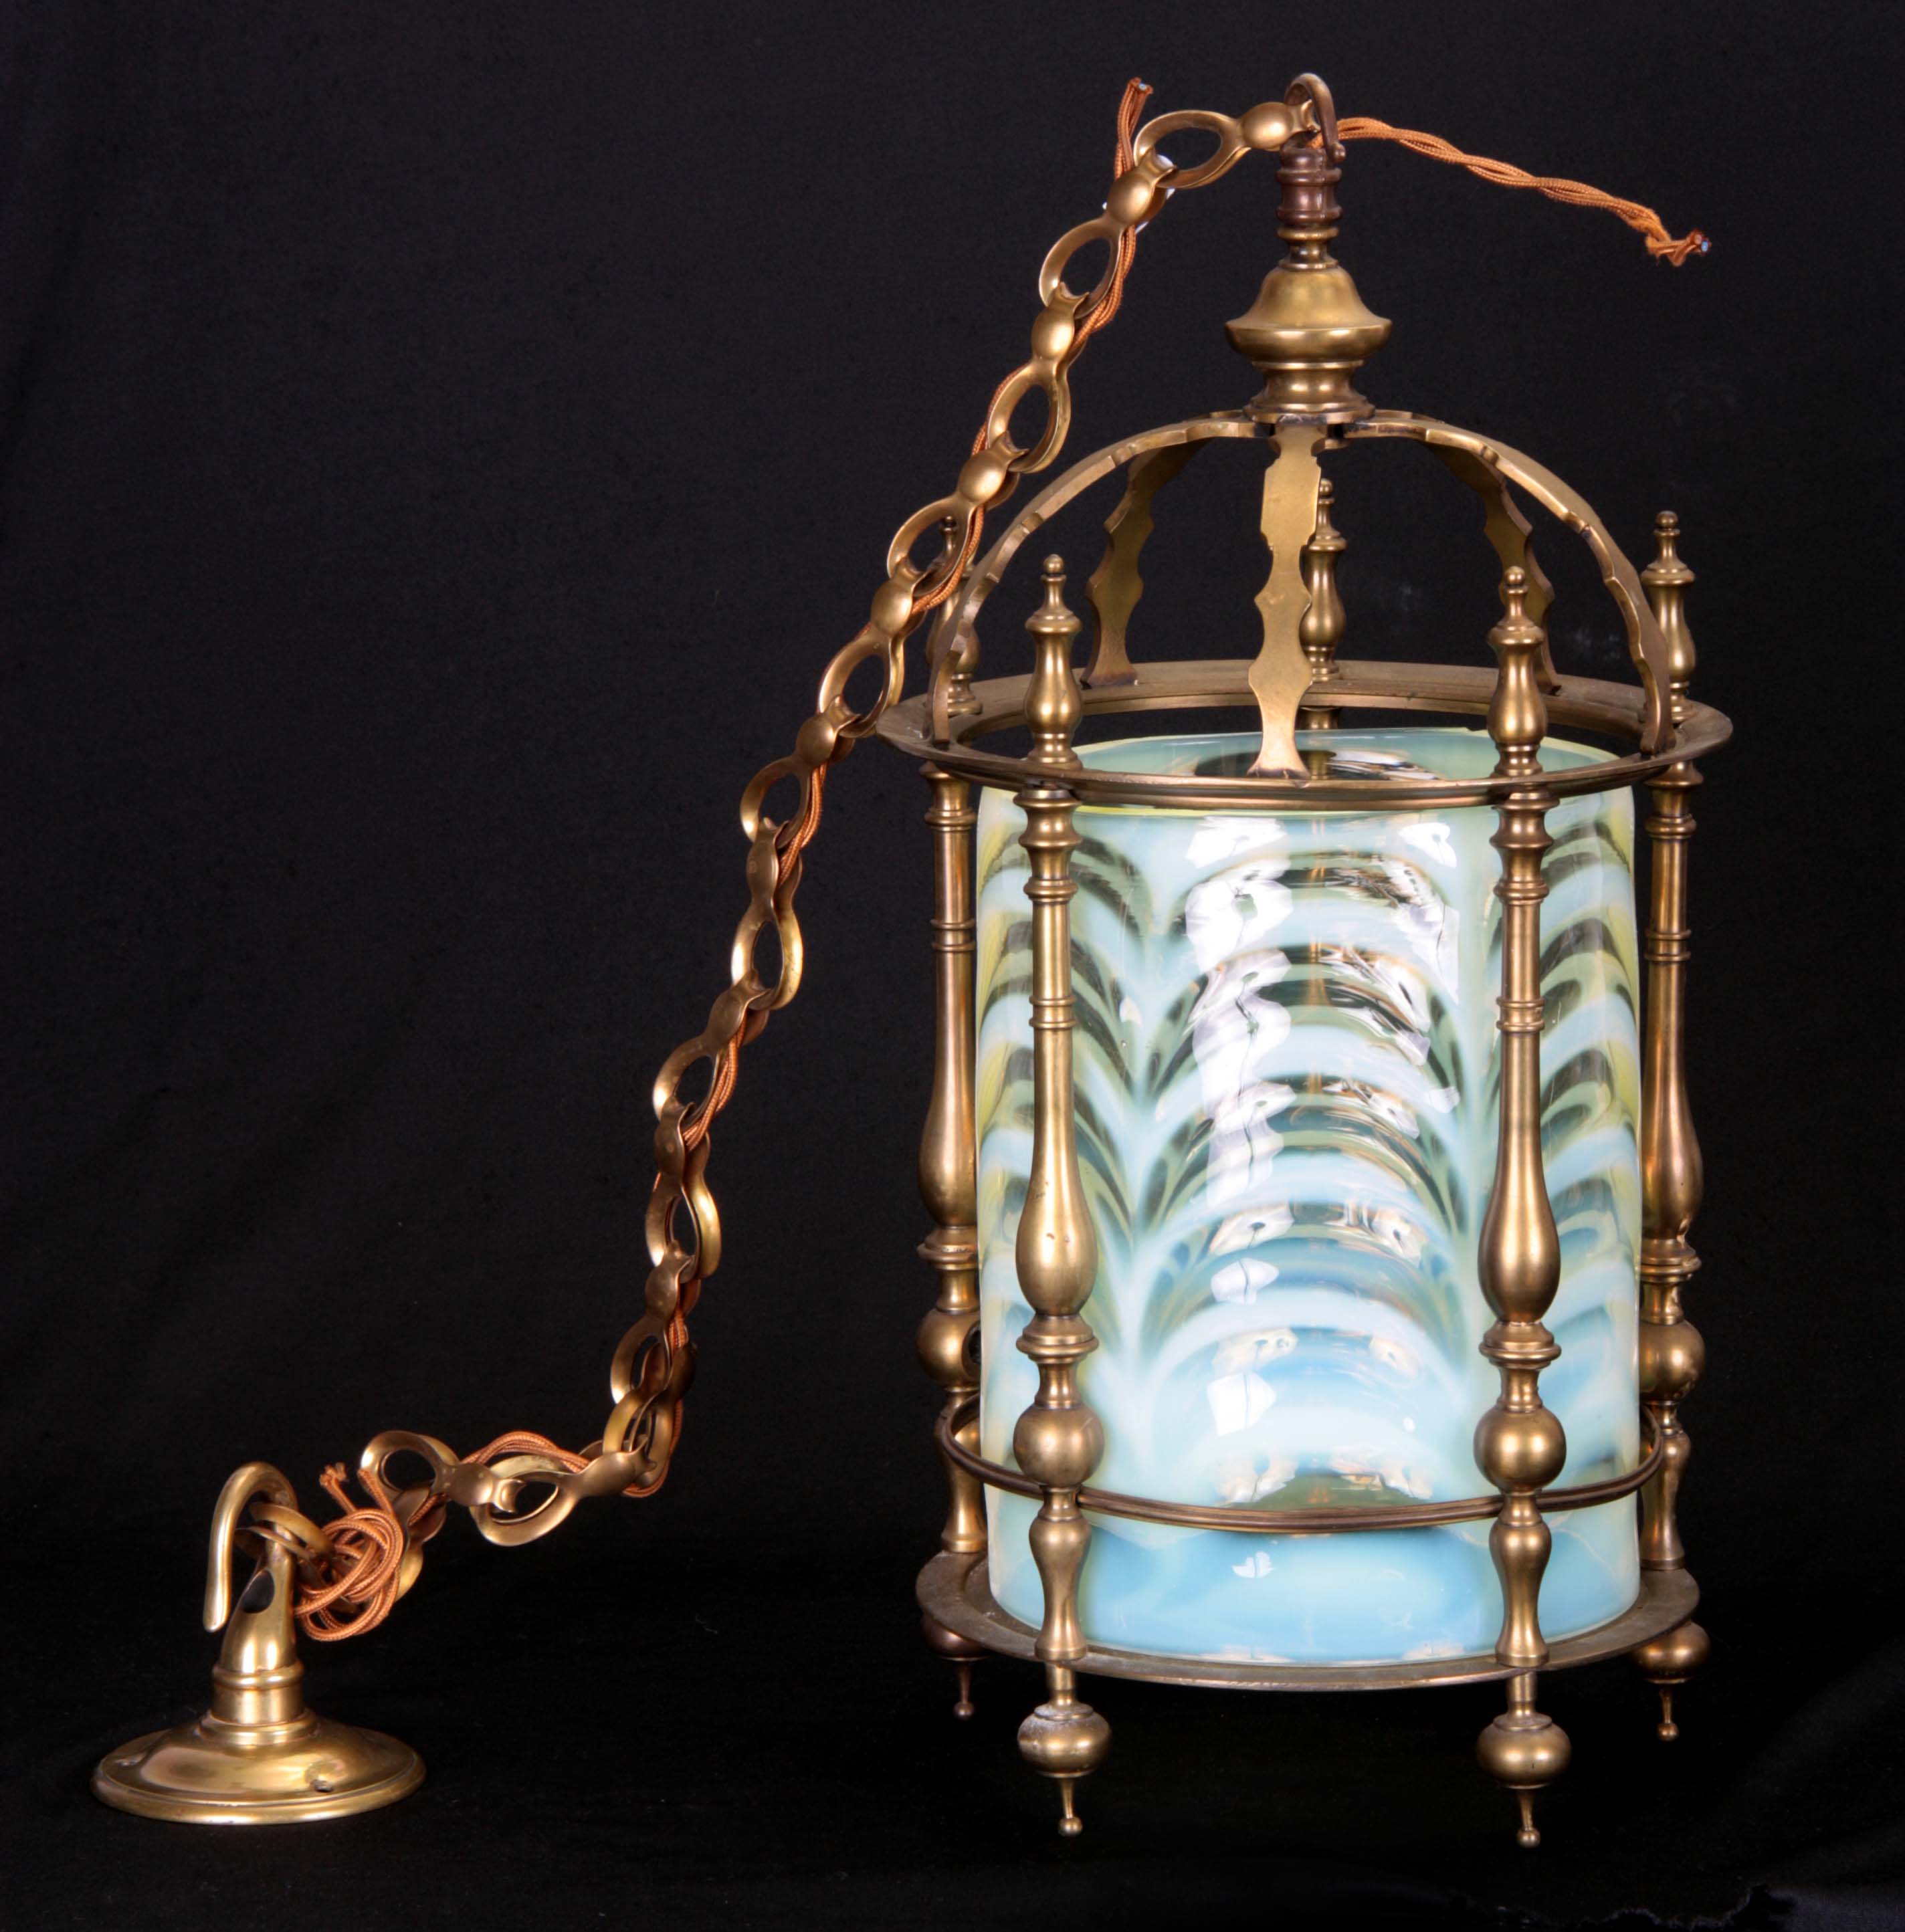 A GOOD LATE 19TH CENTURY ELECTRIFIED BRASS FRAMED HANGING HALL LANTERN complete with brass hanging